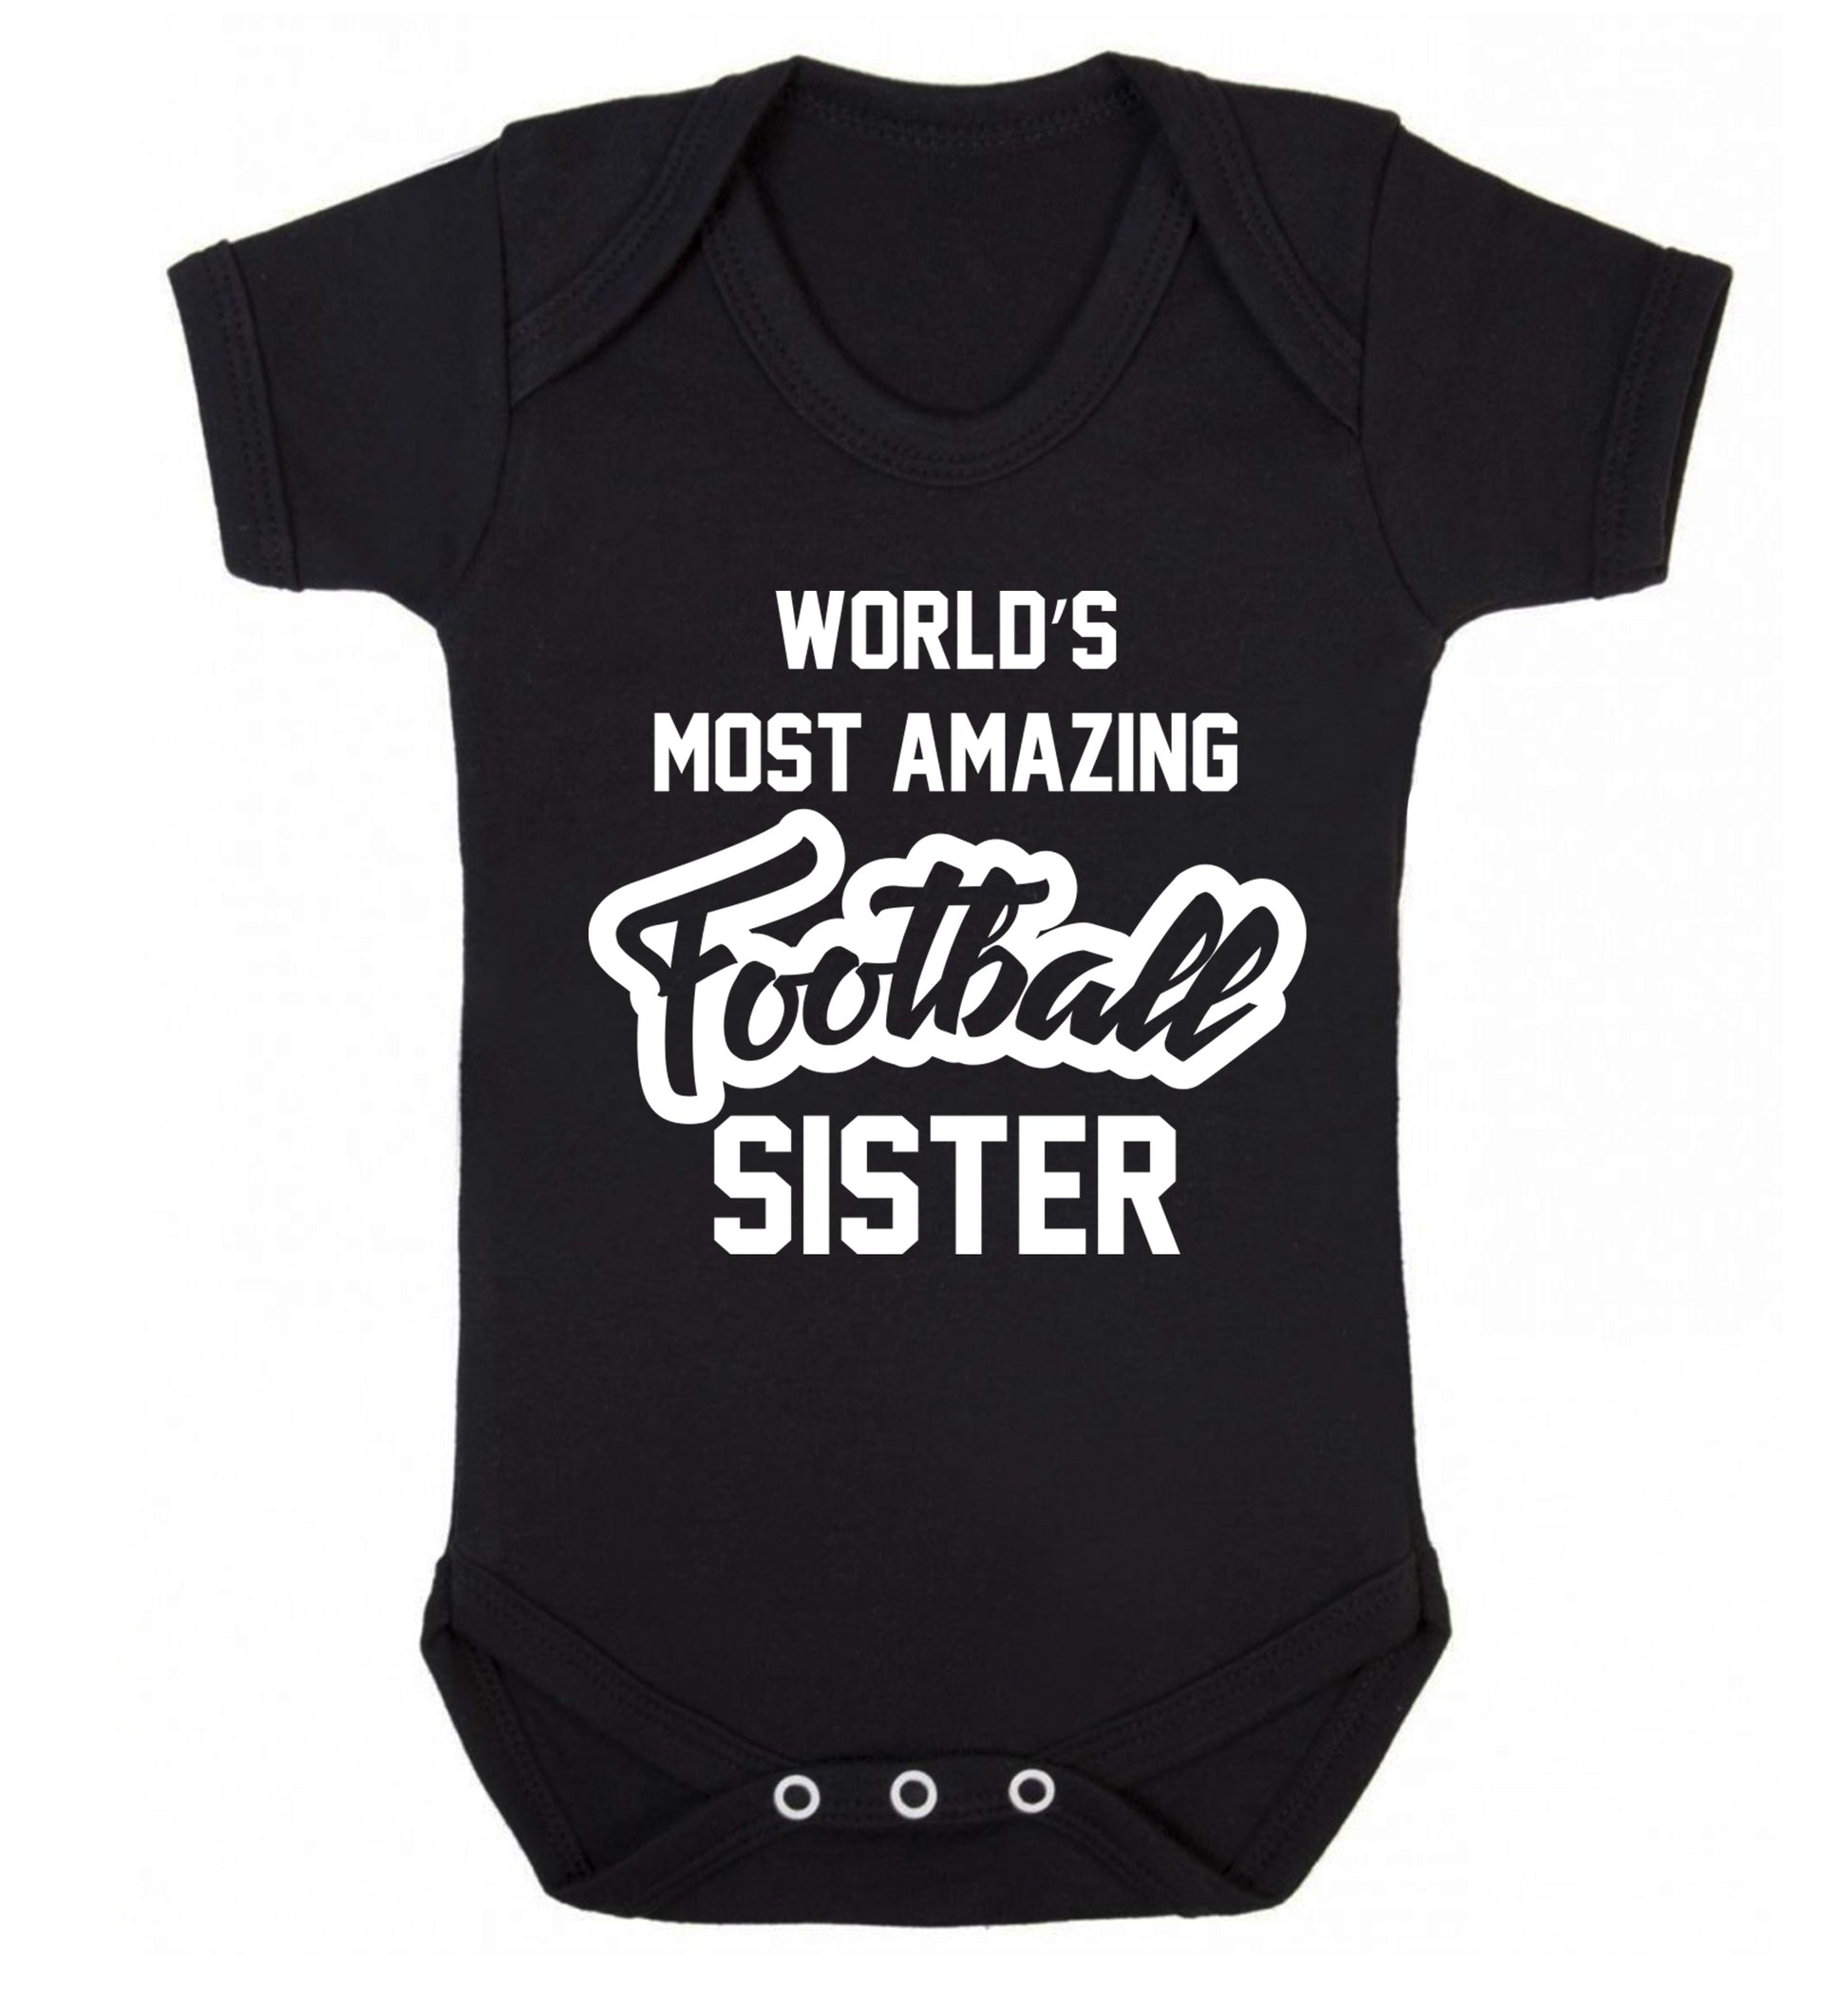 Worlds most amazing football sister Baby Vest black 18-24 months